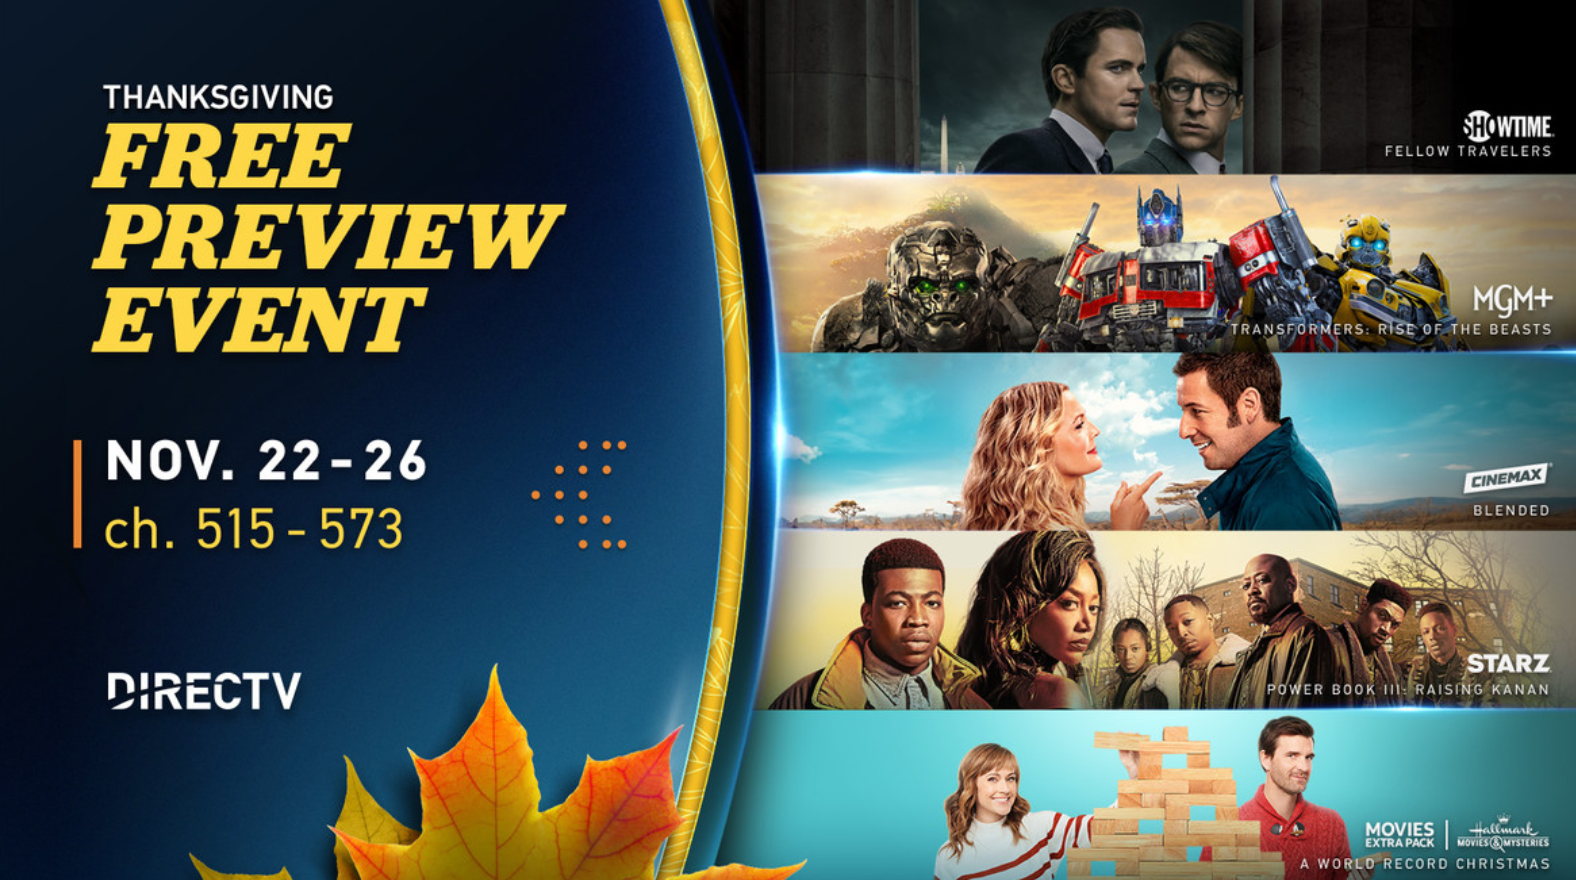 DIRECTV Thanksgiving Free Preview